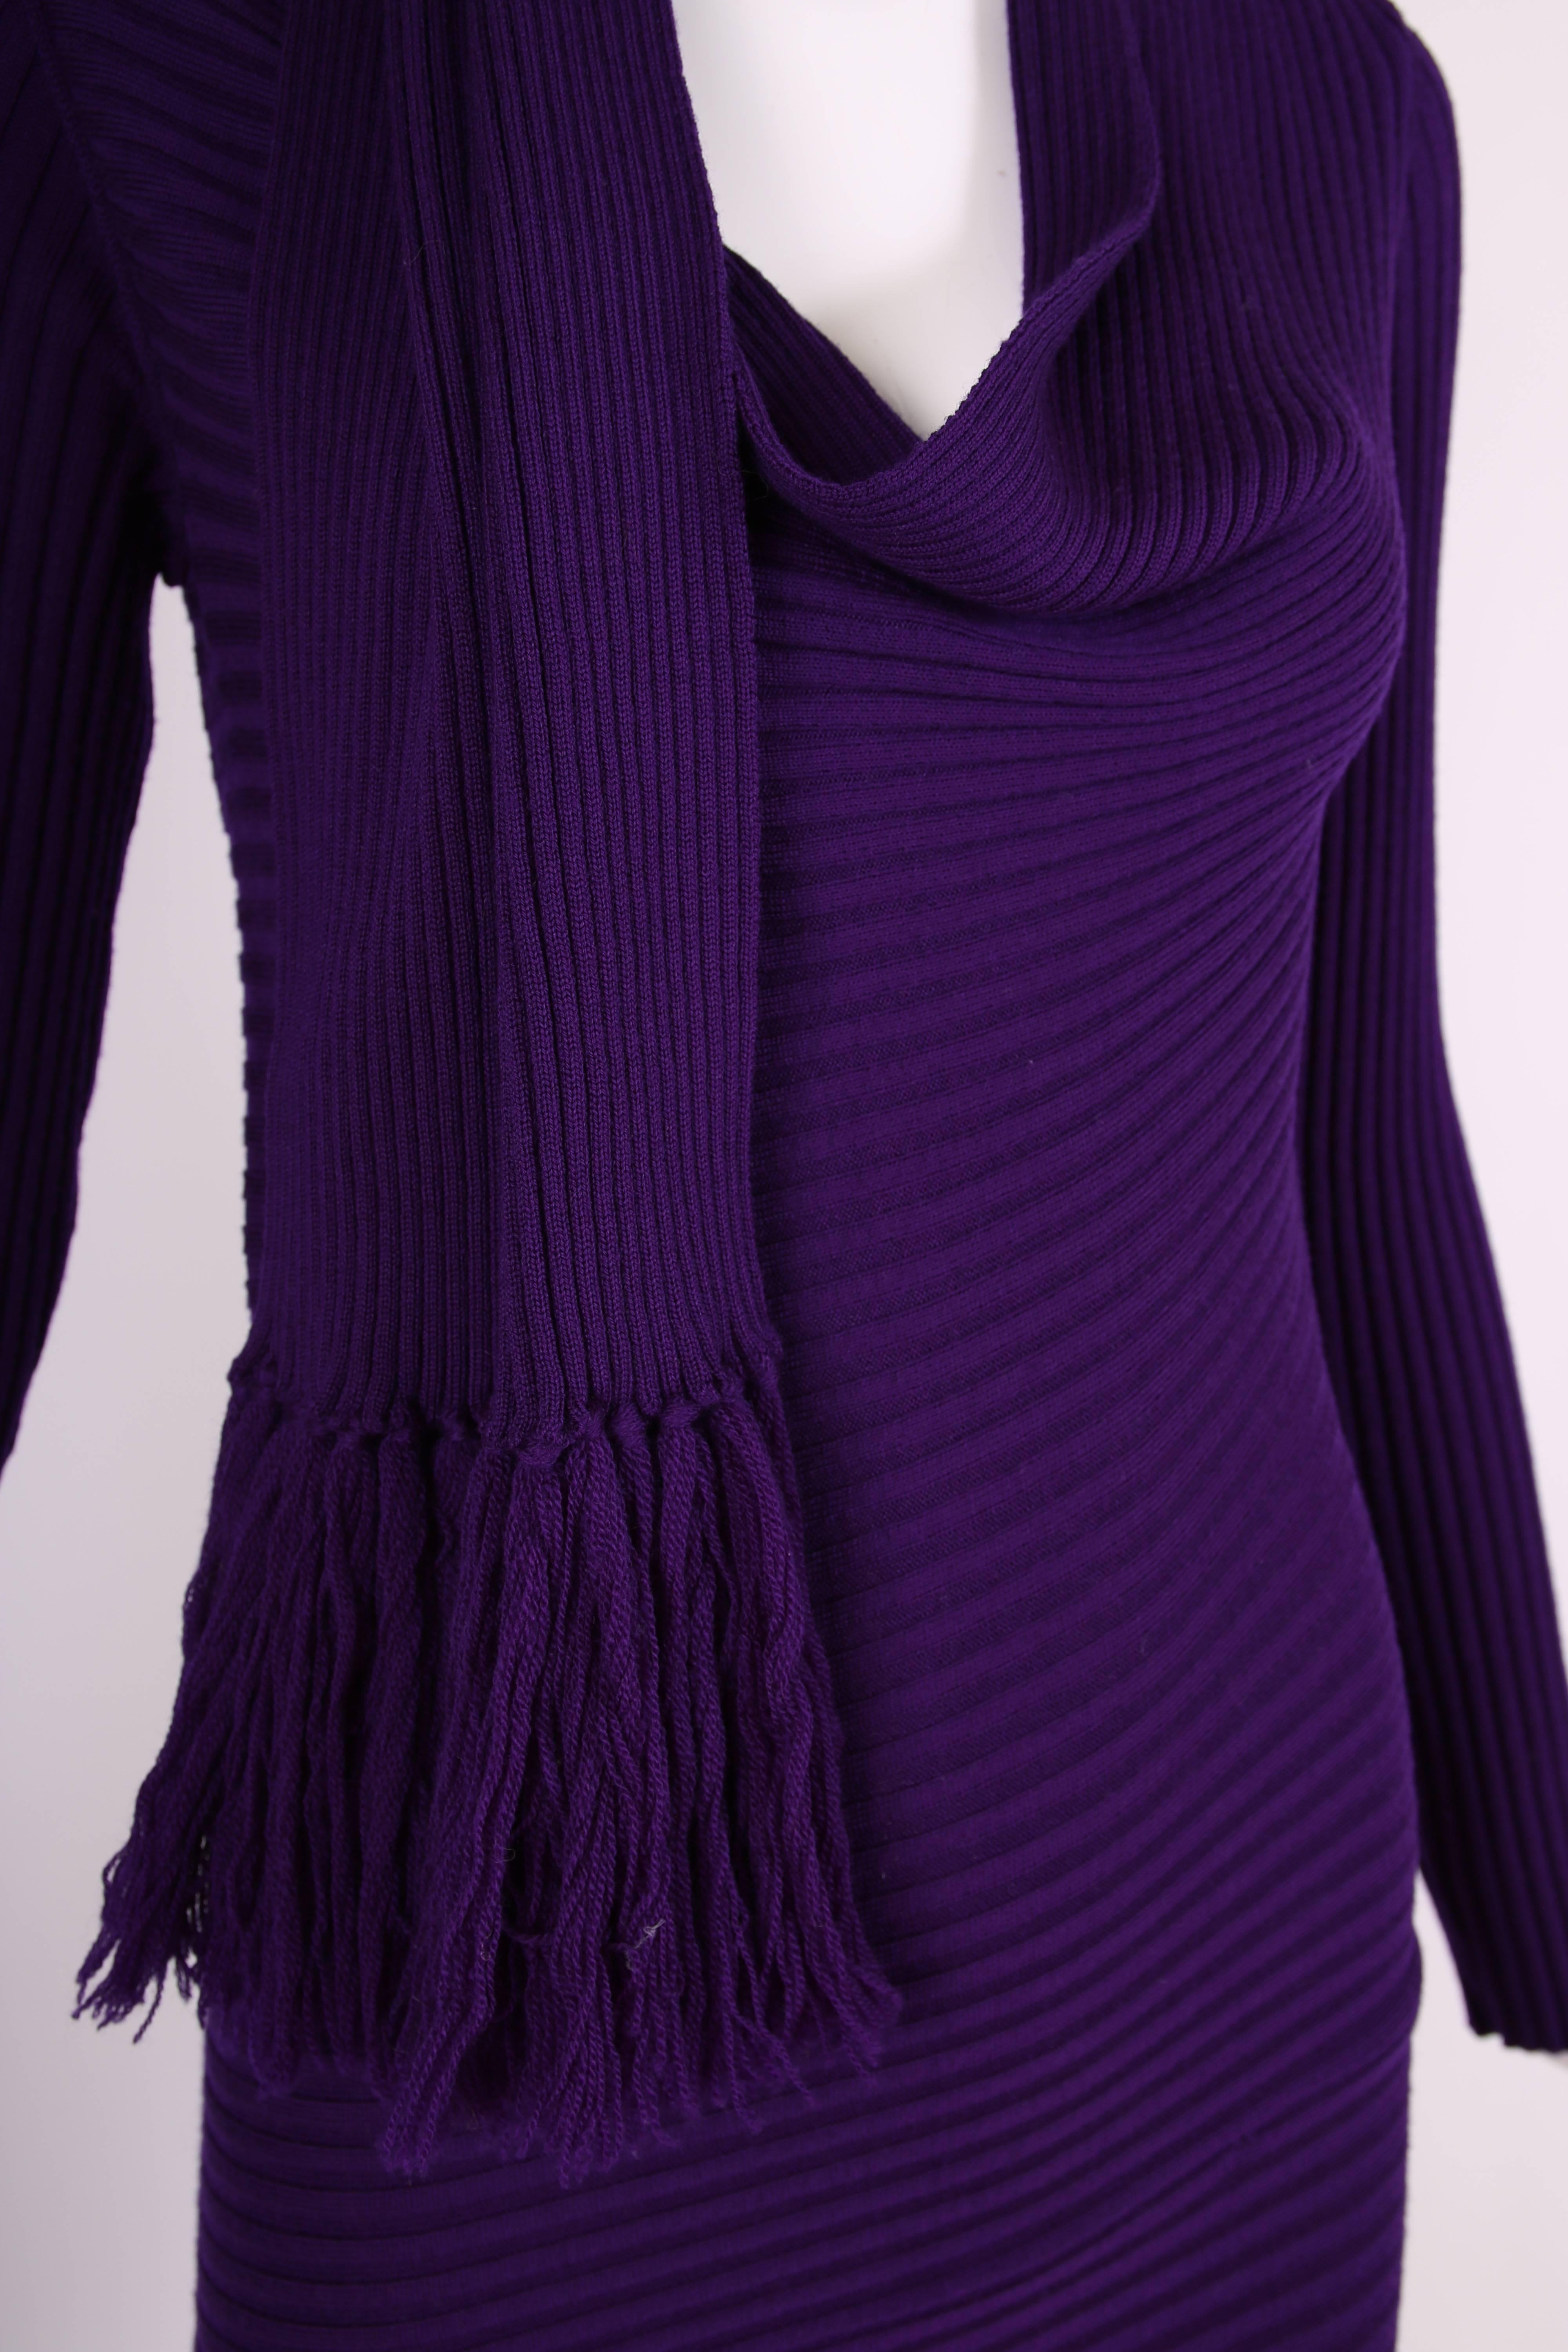 Women's Jean Paul Gaultier Deep Purple Bodycon Dress with Fringed Scarf and Side Slit For Sale